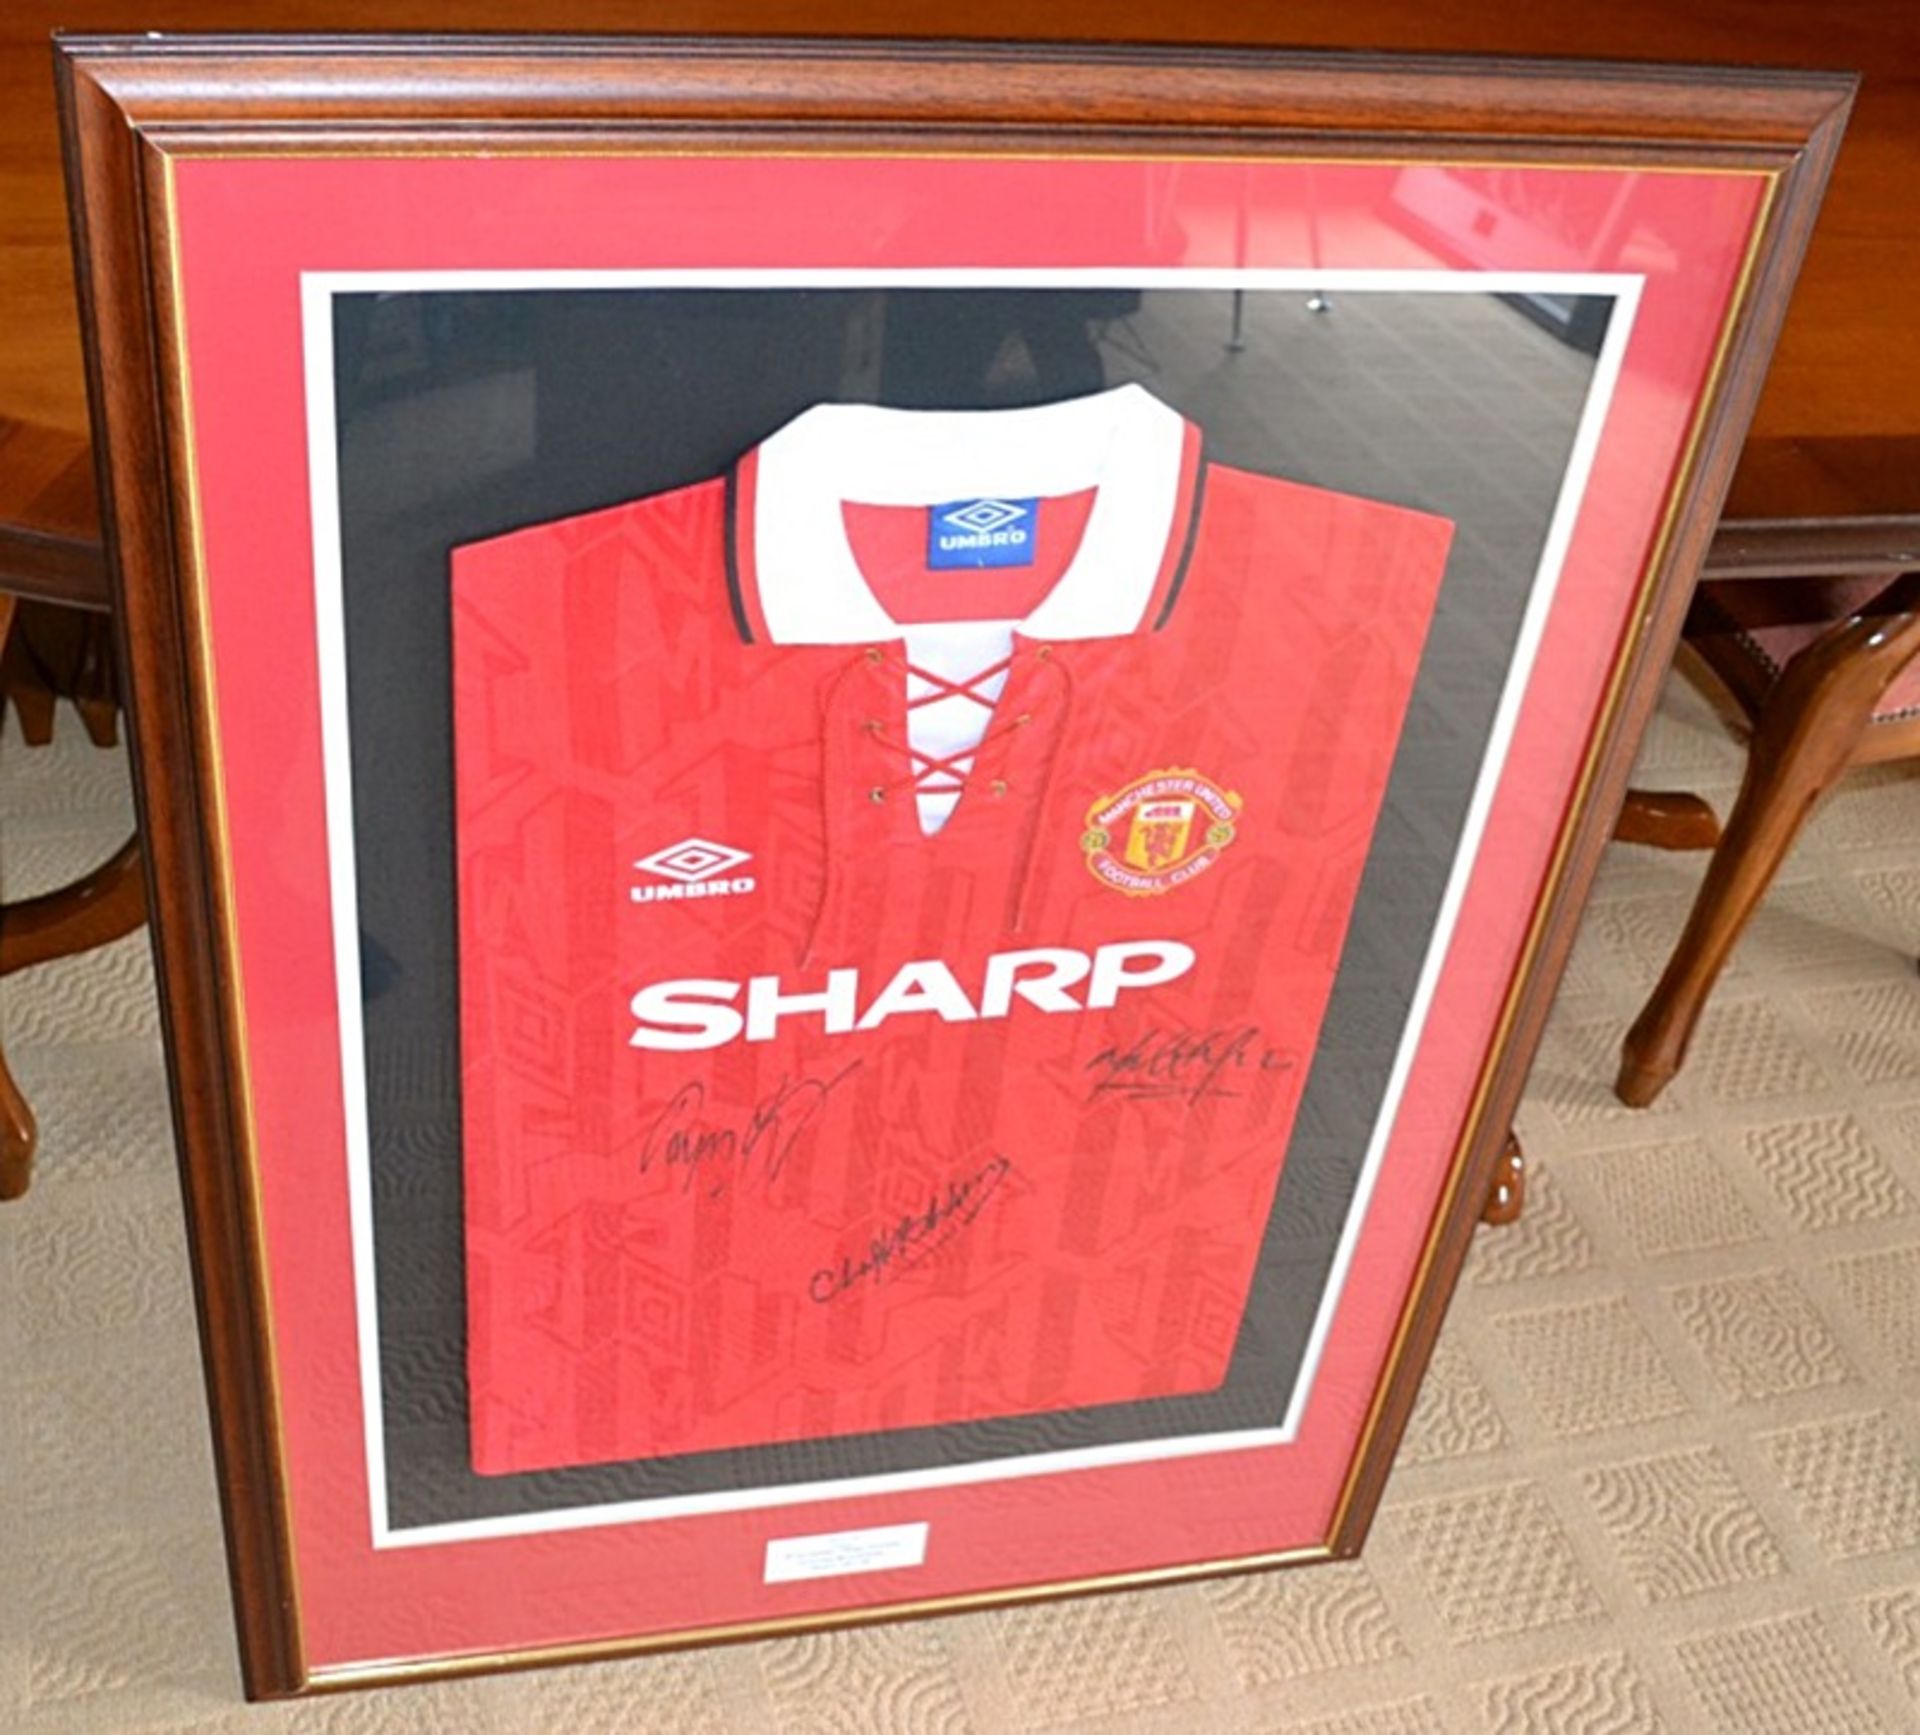 1 x Framed And Mounted Ryan Giggs Signed Football Shirt Autographed By 3 Players (Giggs, Hughes